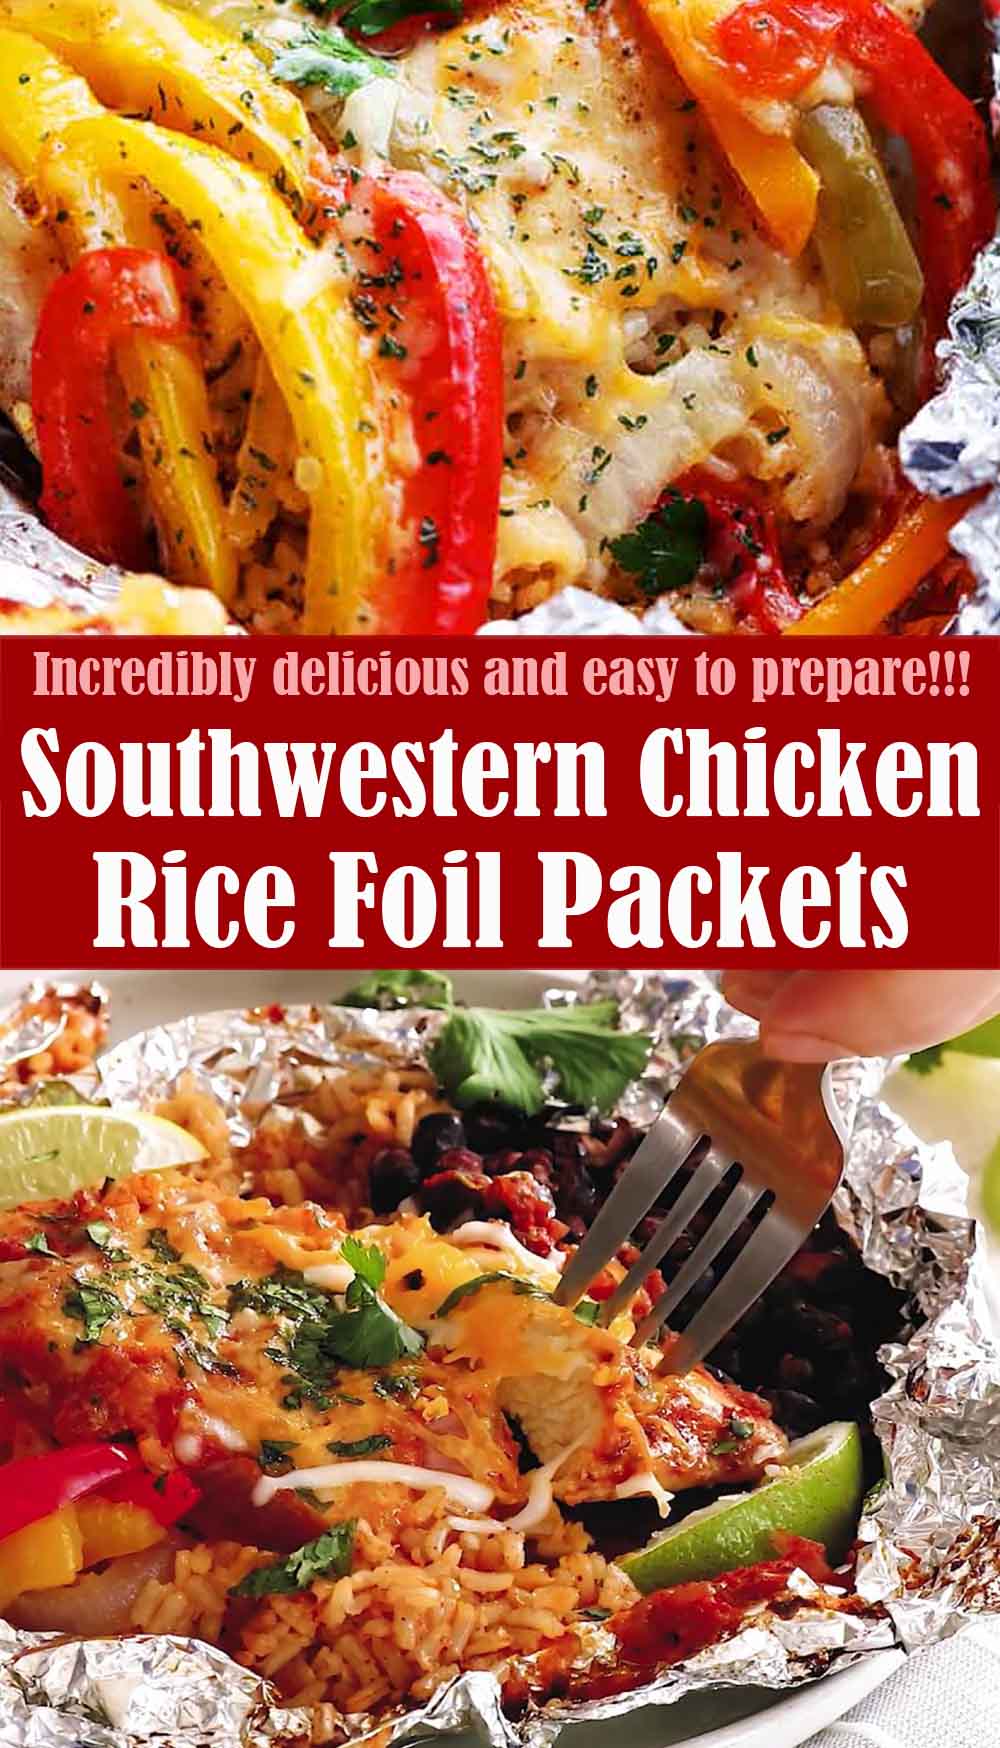 Easy Southwestern Chicken & Rice Foil Packets